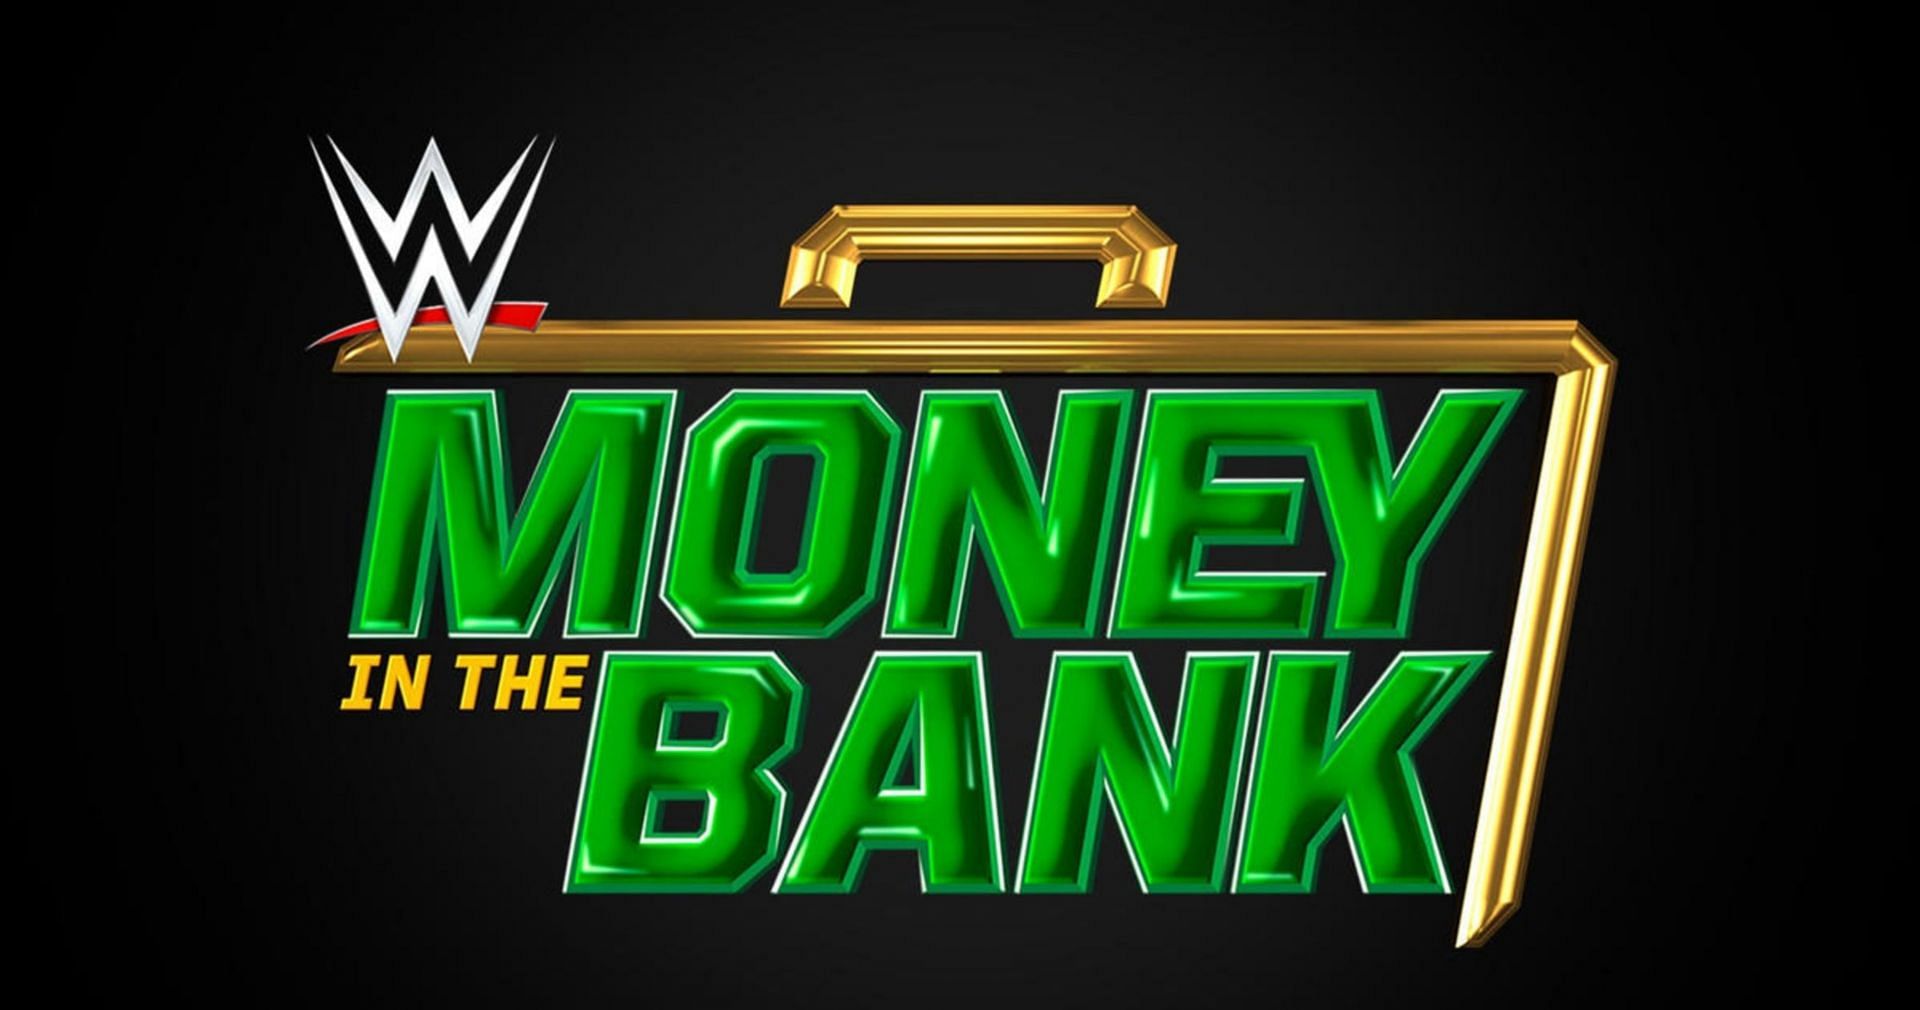 WWE Money in the Bank is scheduled on July 1st in London, England.